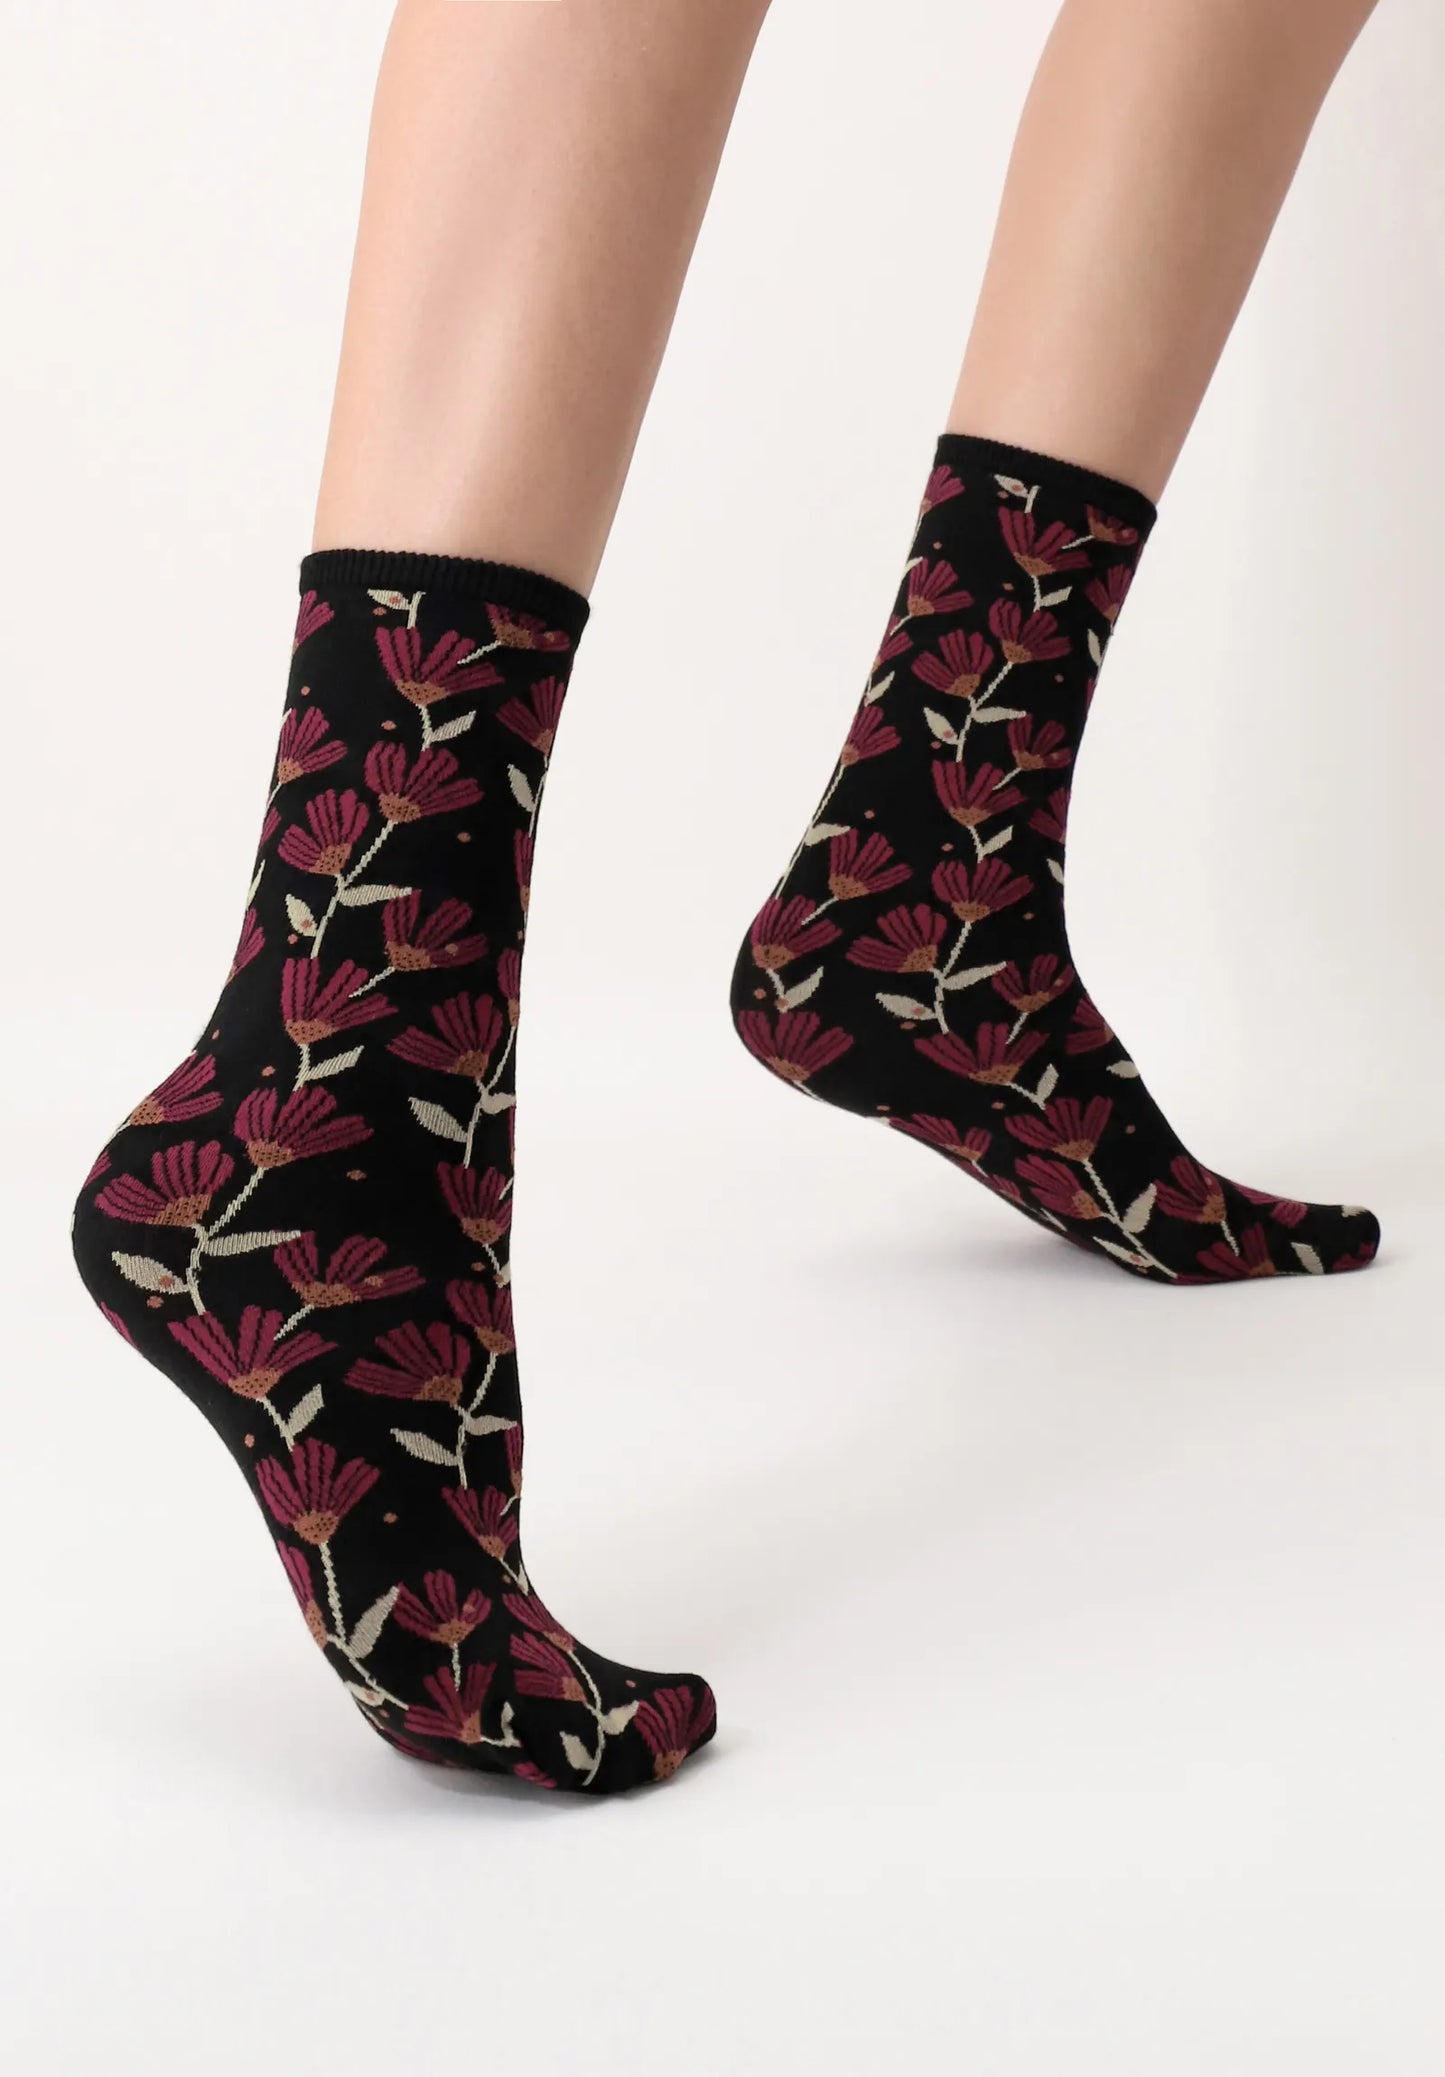 Oroblù Bloom Sock - Black viscose mix ankle socks with an all over woven floral pattern in wine, rusty orange and cream.